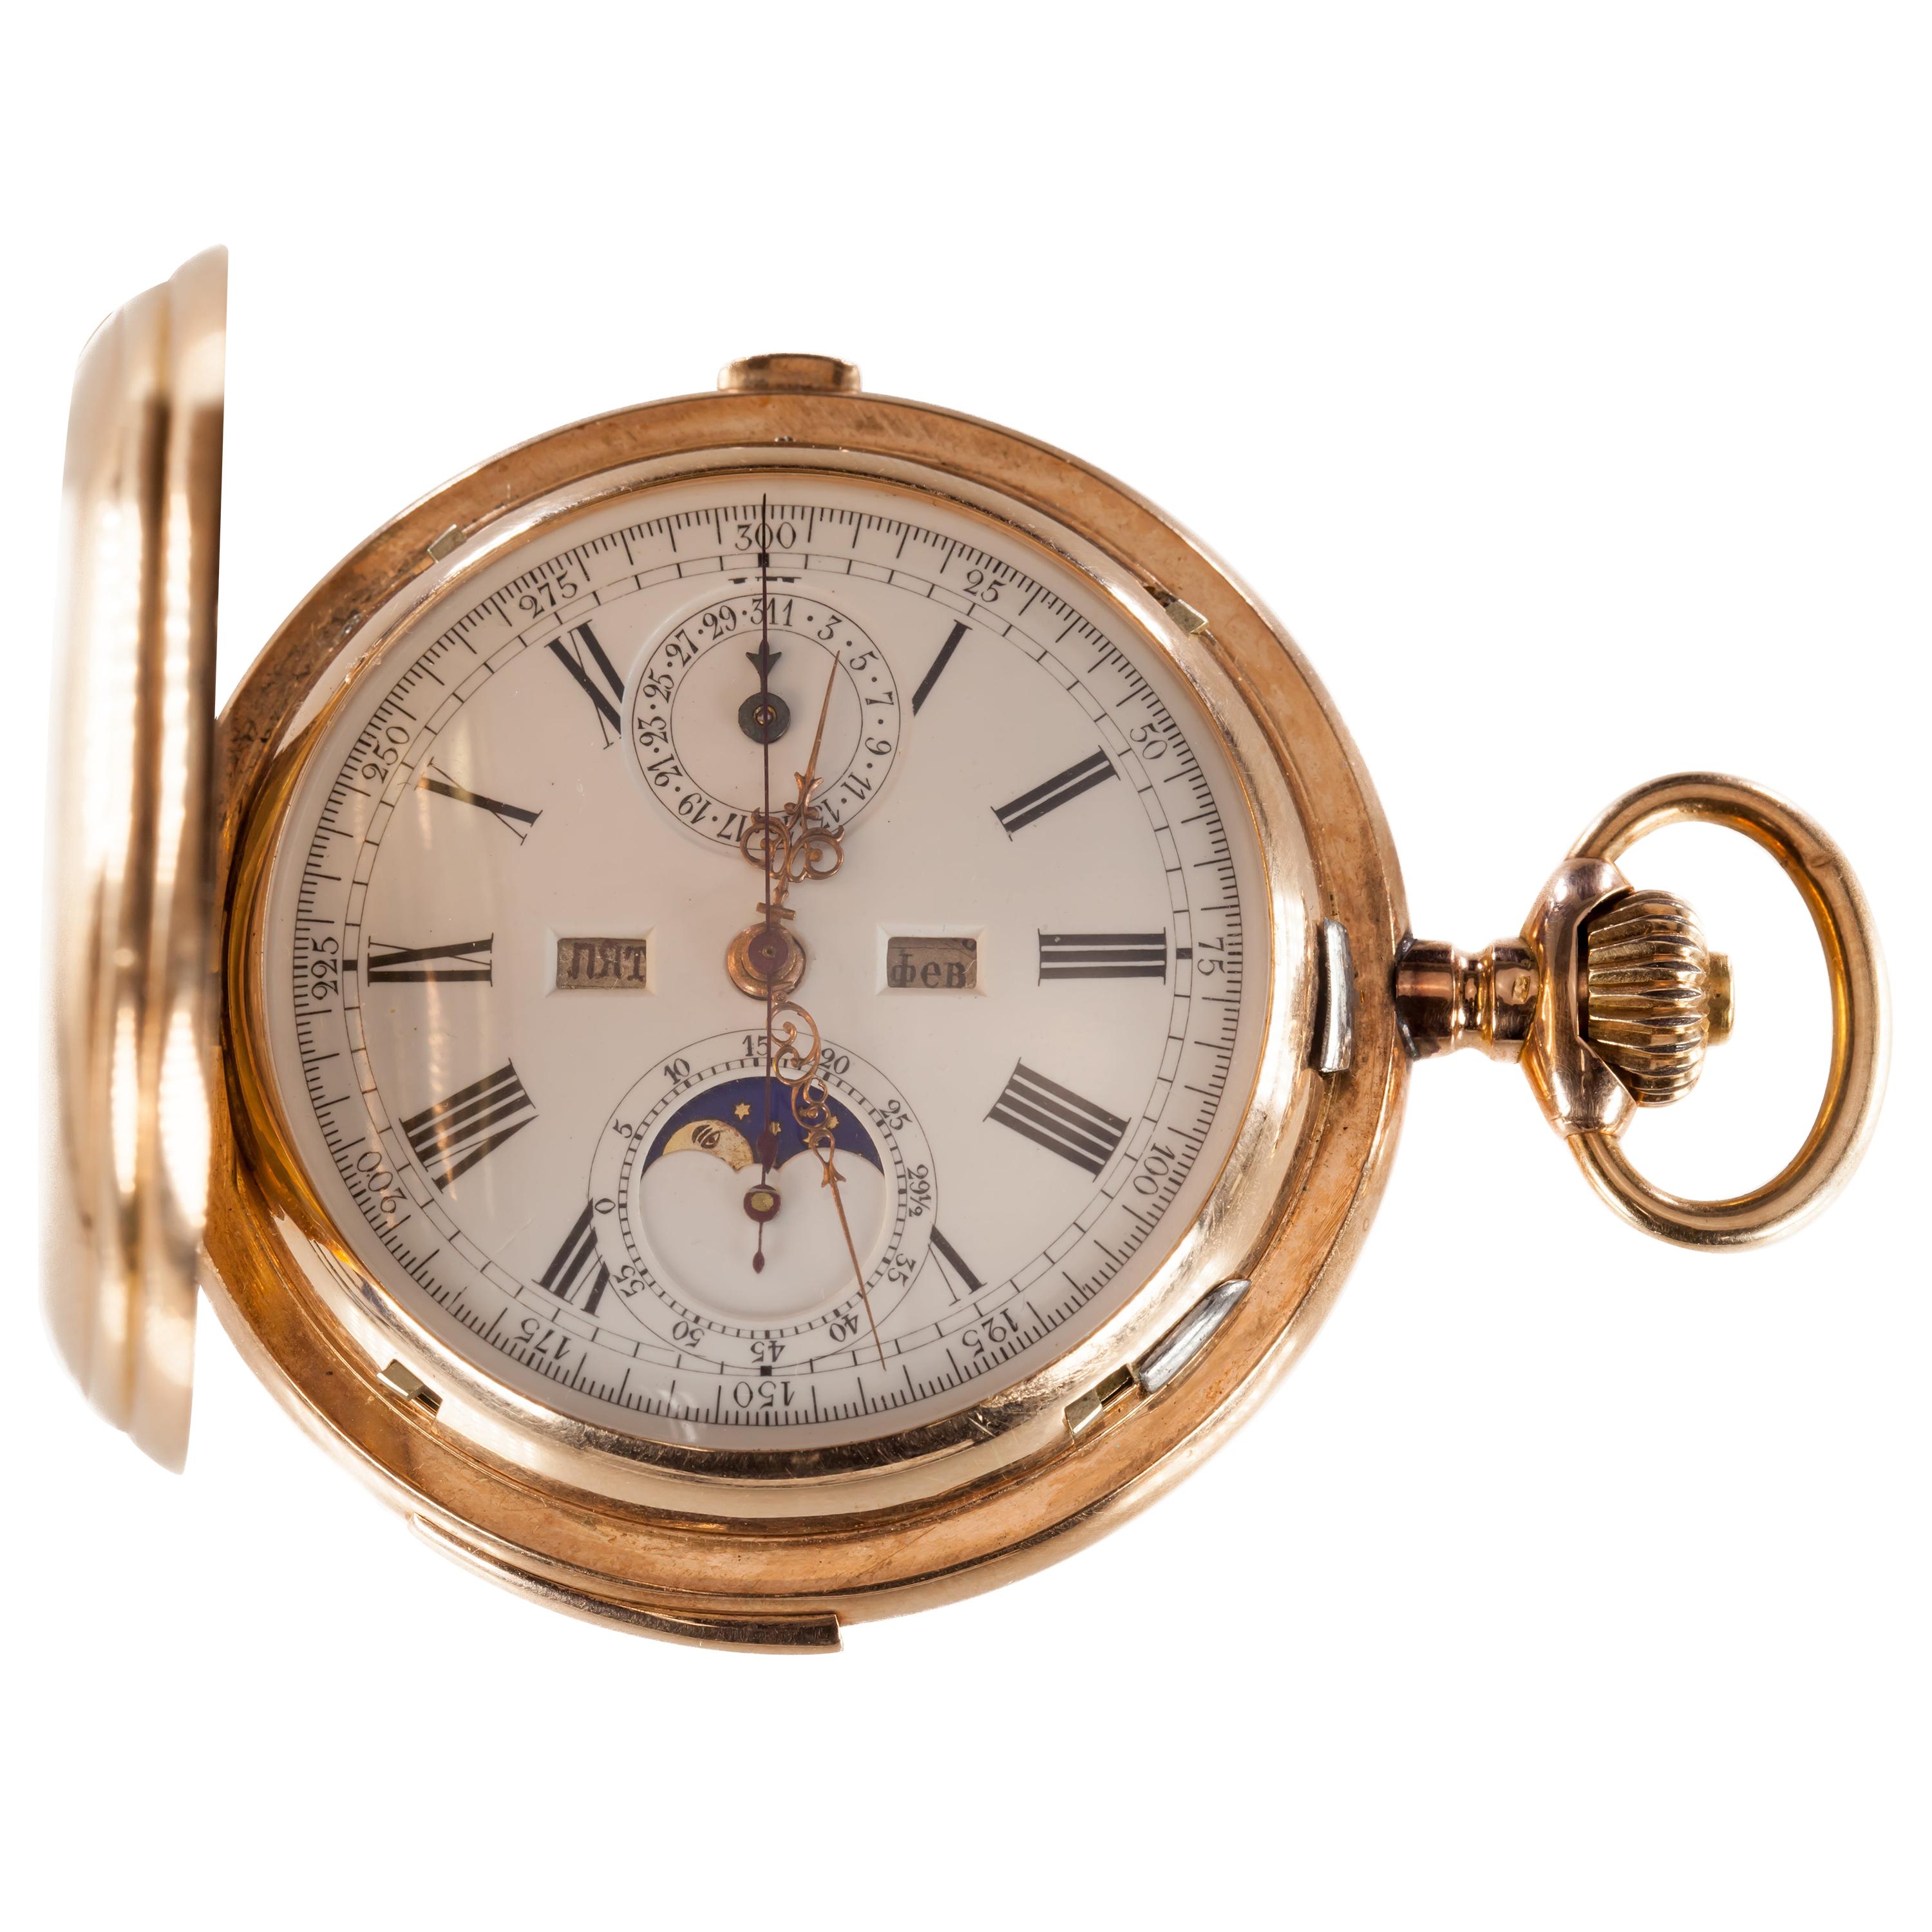 Valdor Moonphase Minute Repeater 32 Jewel Antique Pocket Watch in Yellow Gold